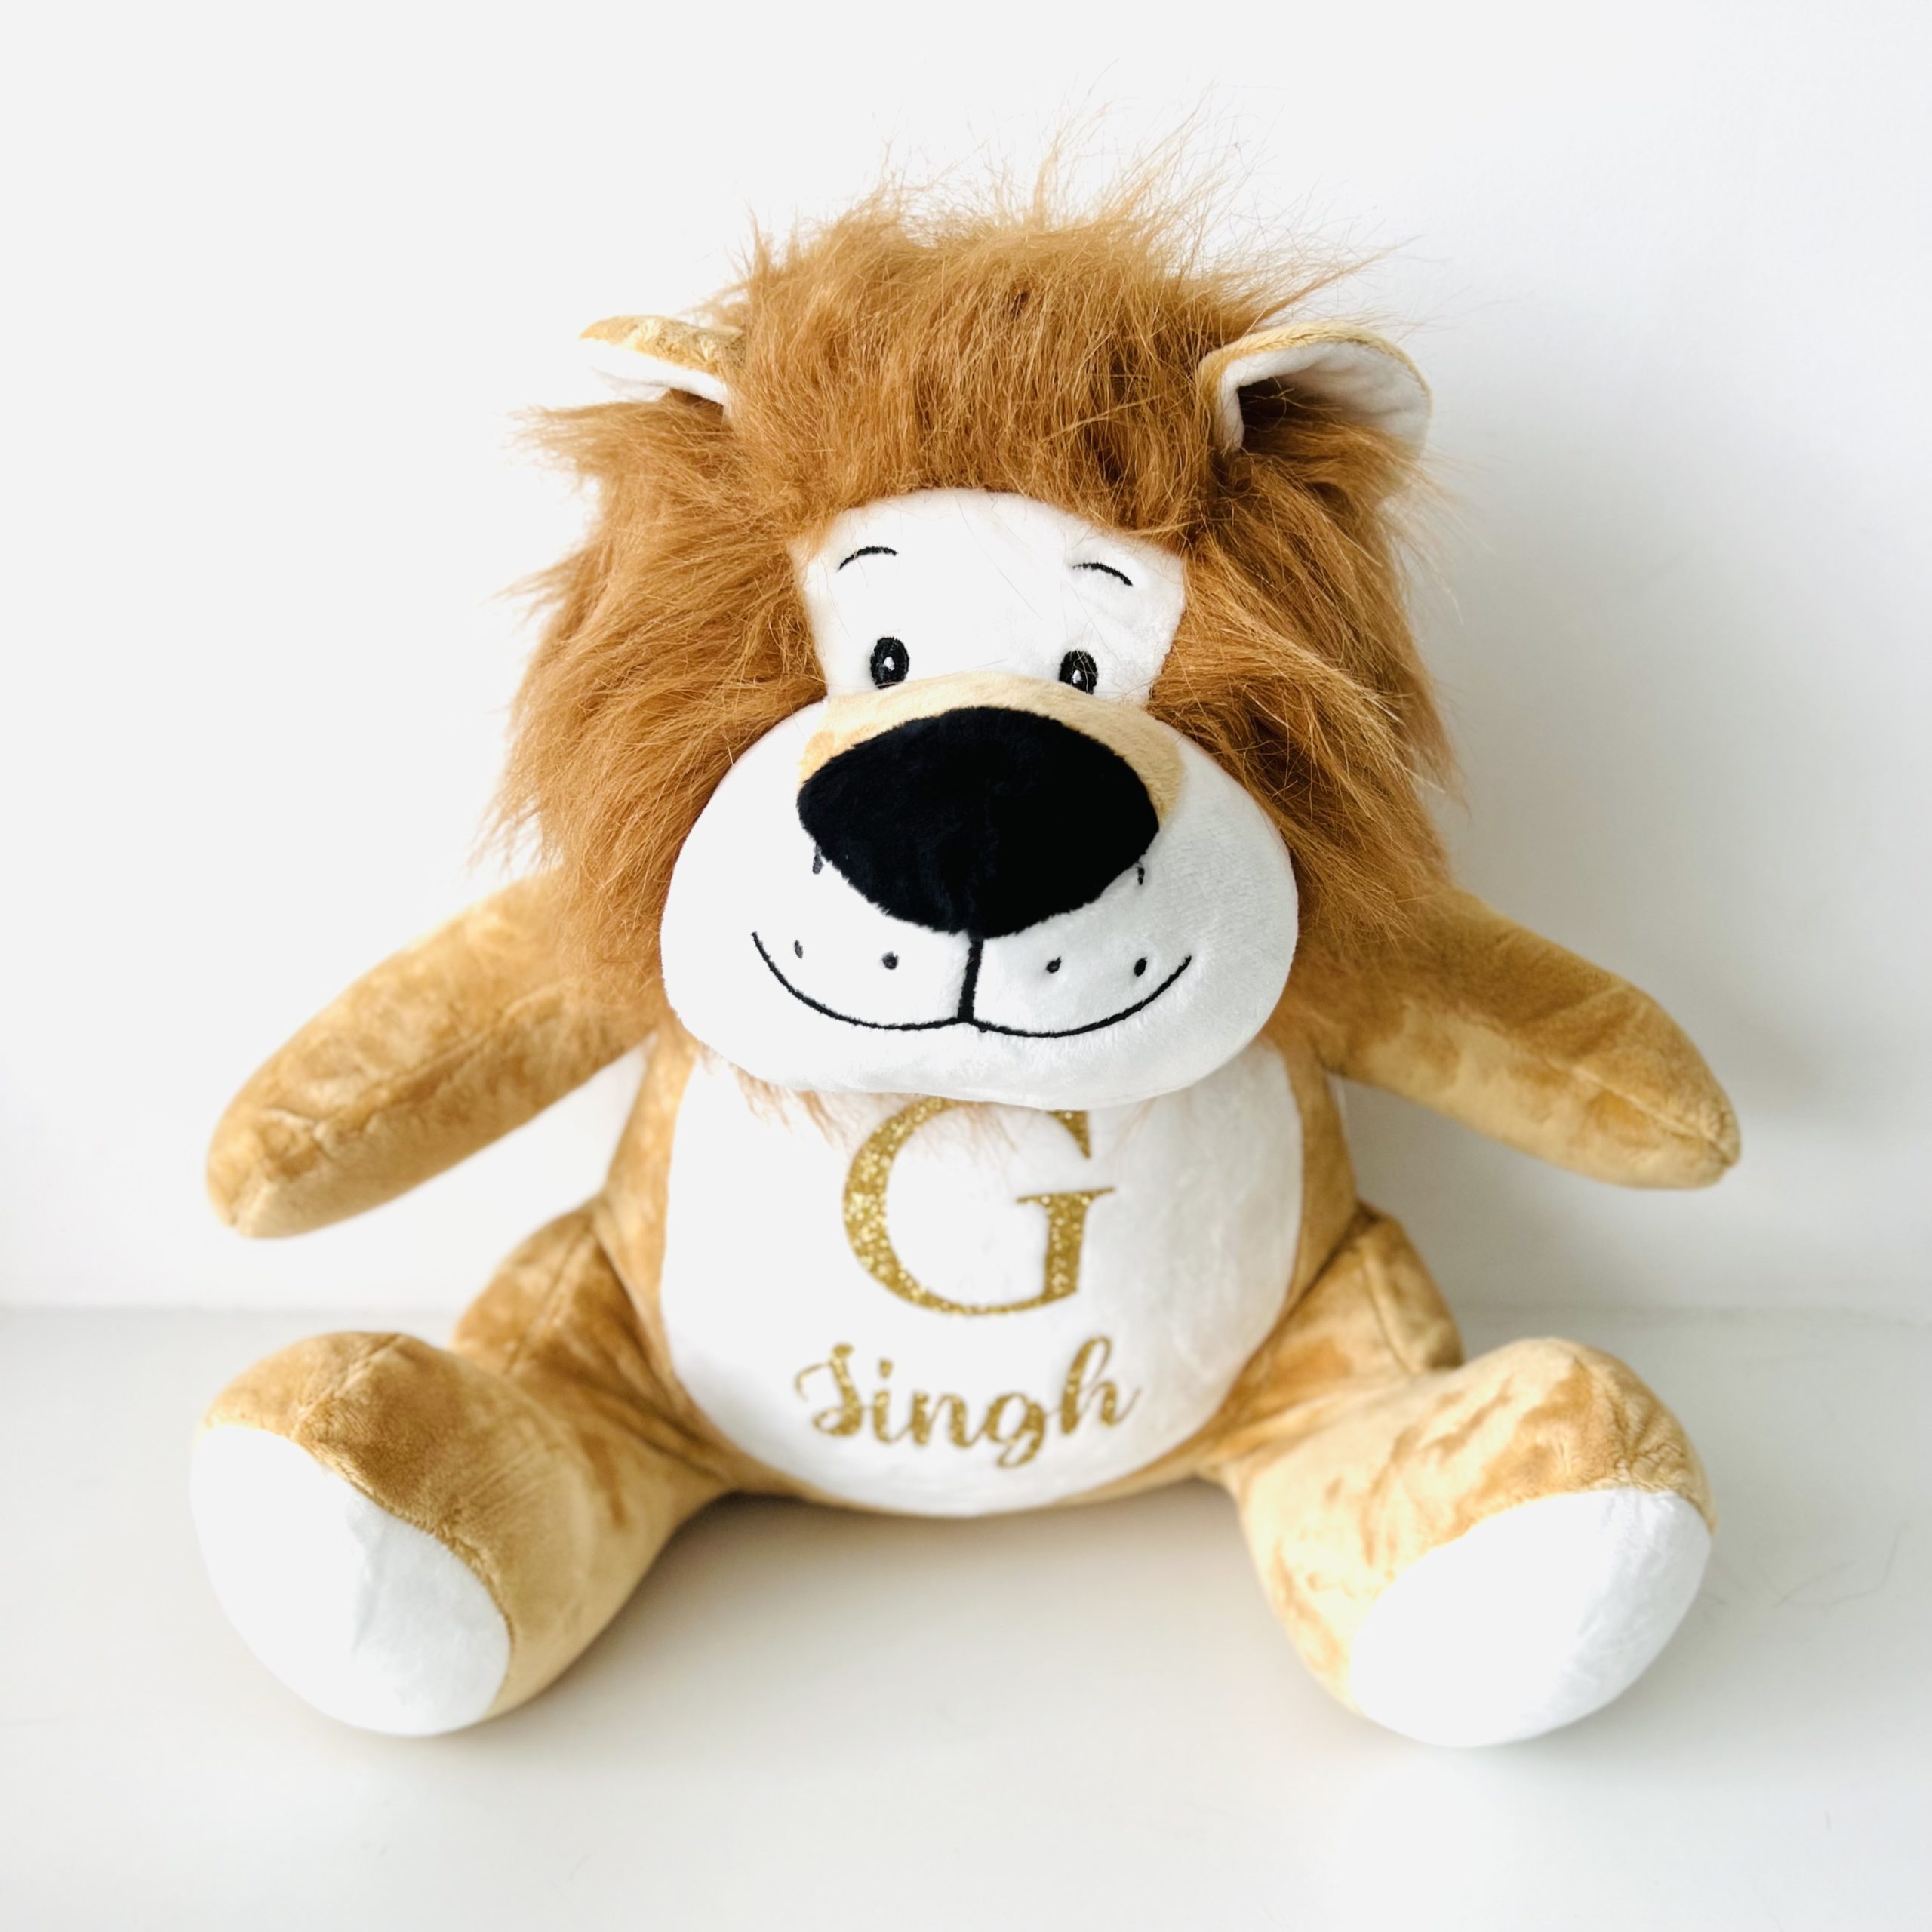 Personalised Teddy Bears | Sikh Colouring Books by Ranjeet Kaur